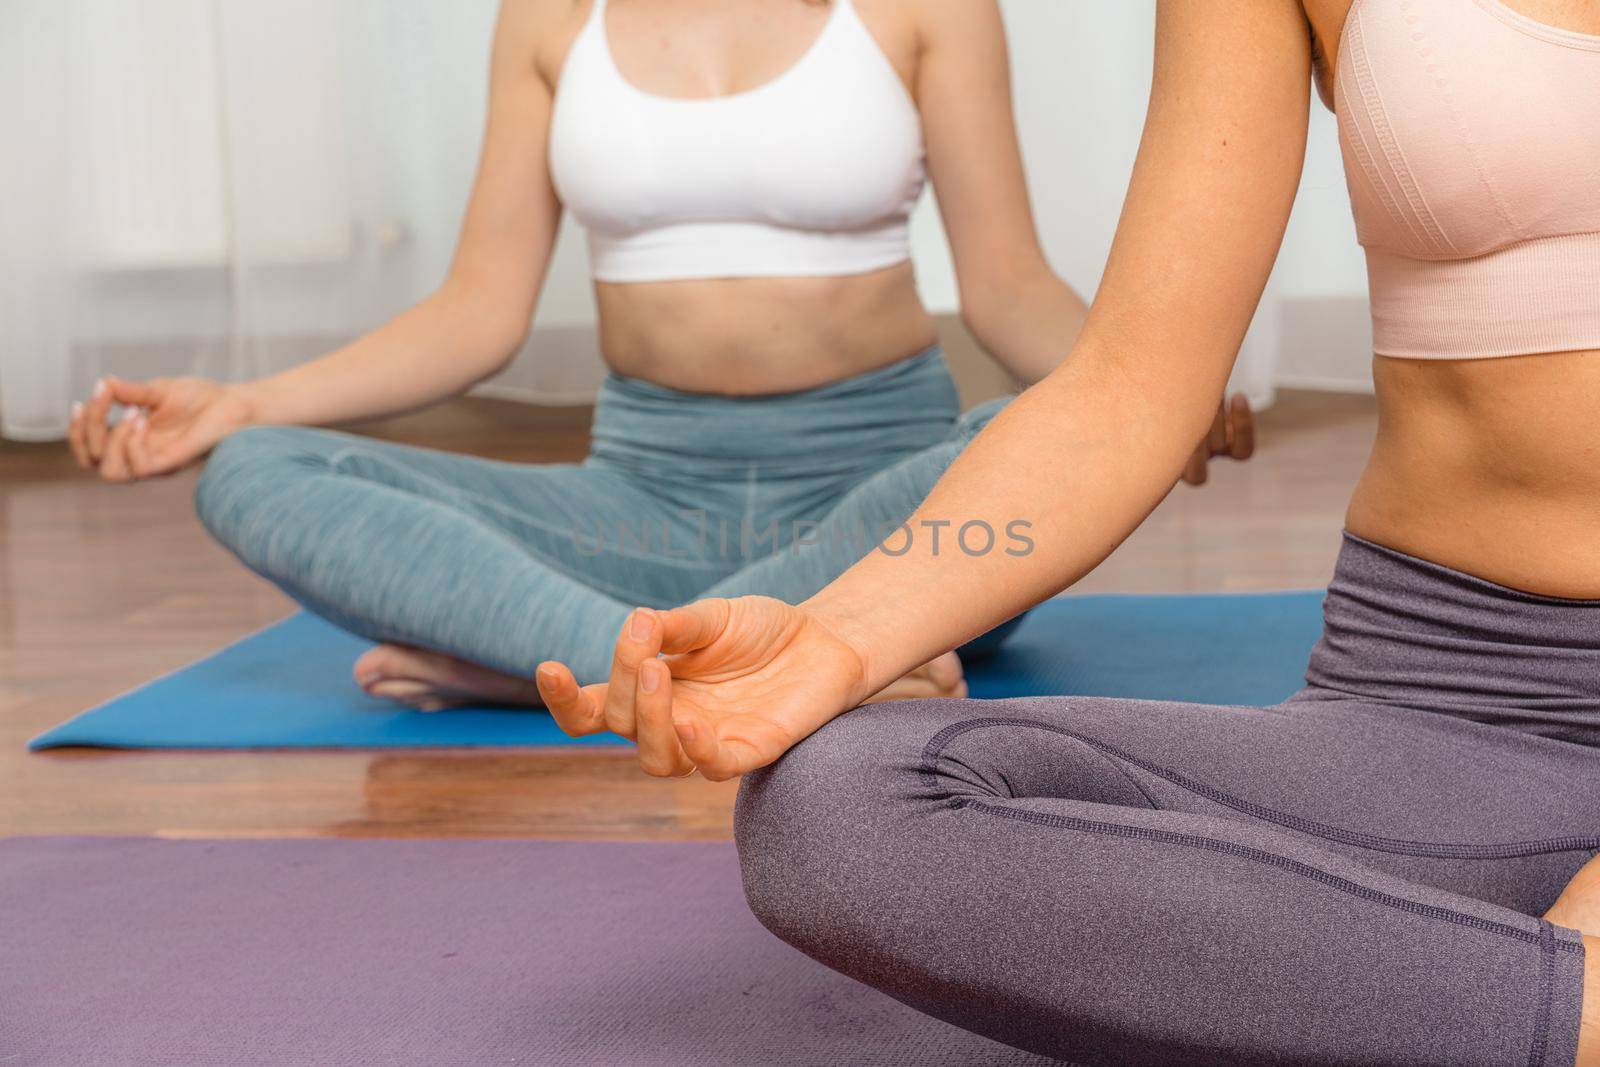 Two attractive athletic girls train asana yoga pose on mats on a light background. A group of young women stretch out in the gym. Healthy lifestyle concept by Matiunina